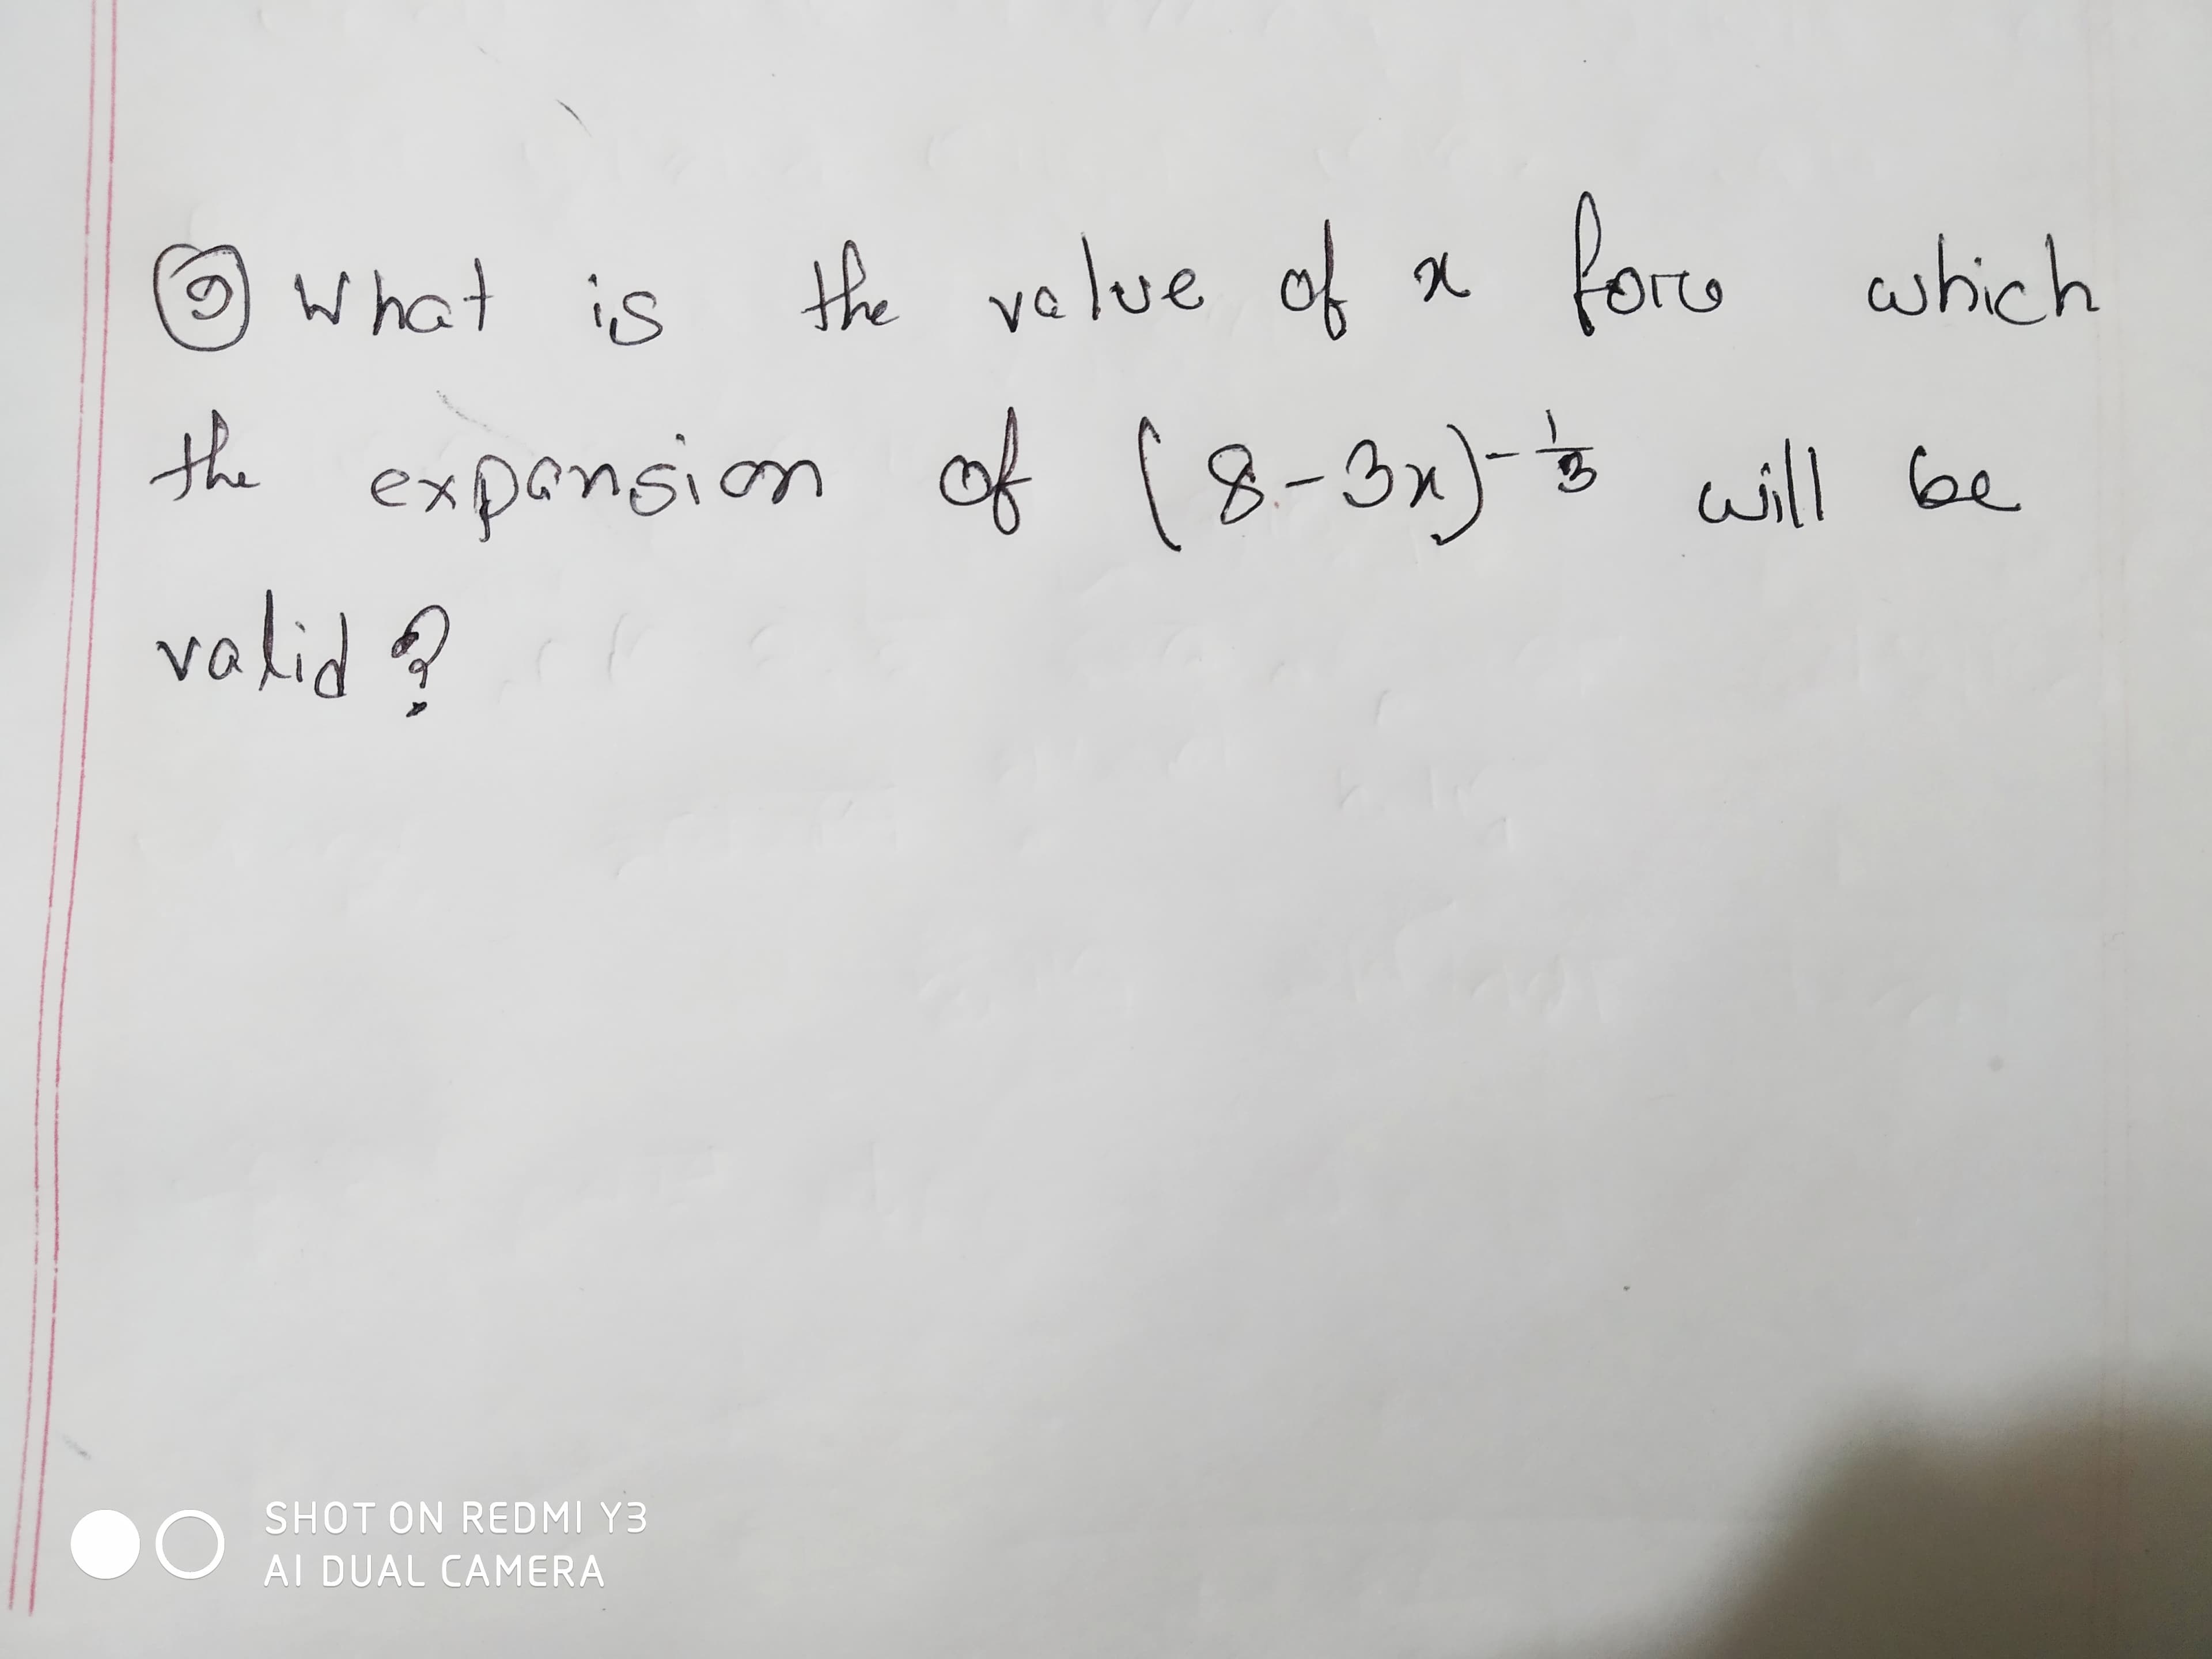 the velue of x
is
fore which
What
the exponsion of 18-3x)- will be
X.
valid?
SHOT ON REDMI Y3
AI DUAL CAMERA
